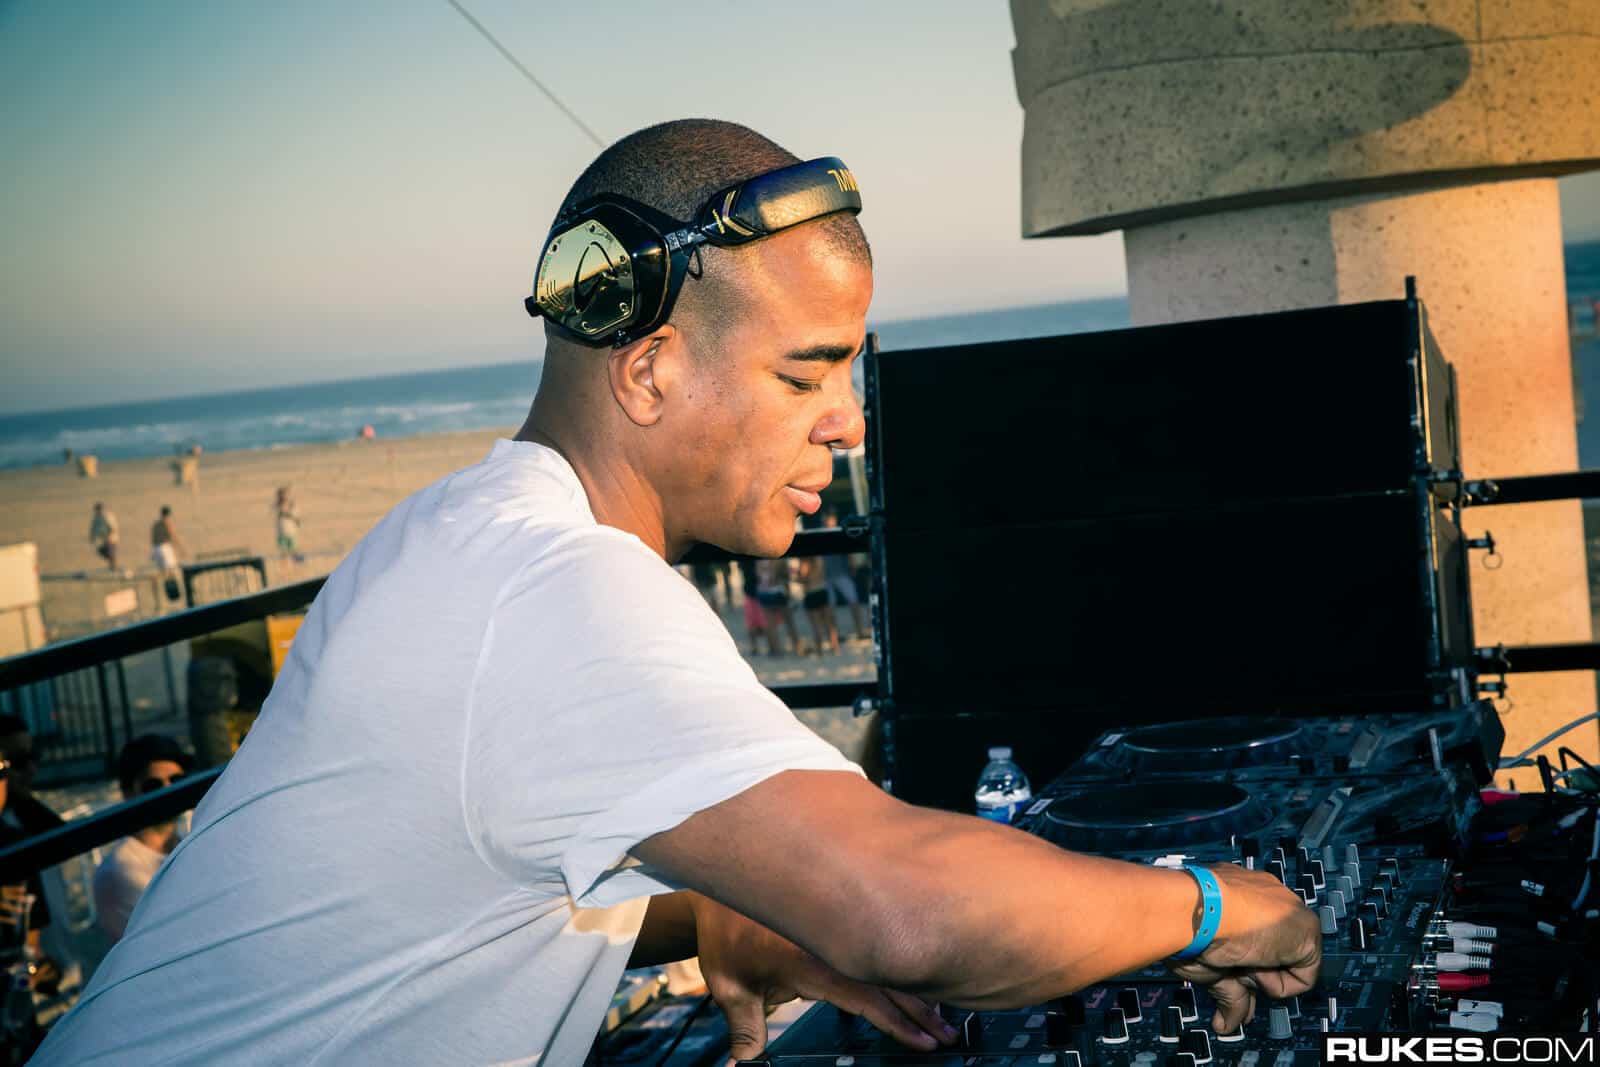 DJs accuse Erick Morillo of sexual assault and inappropriate behaviour